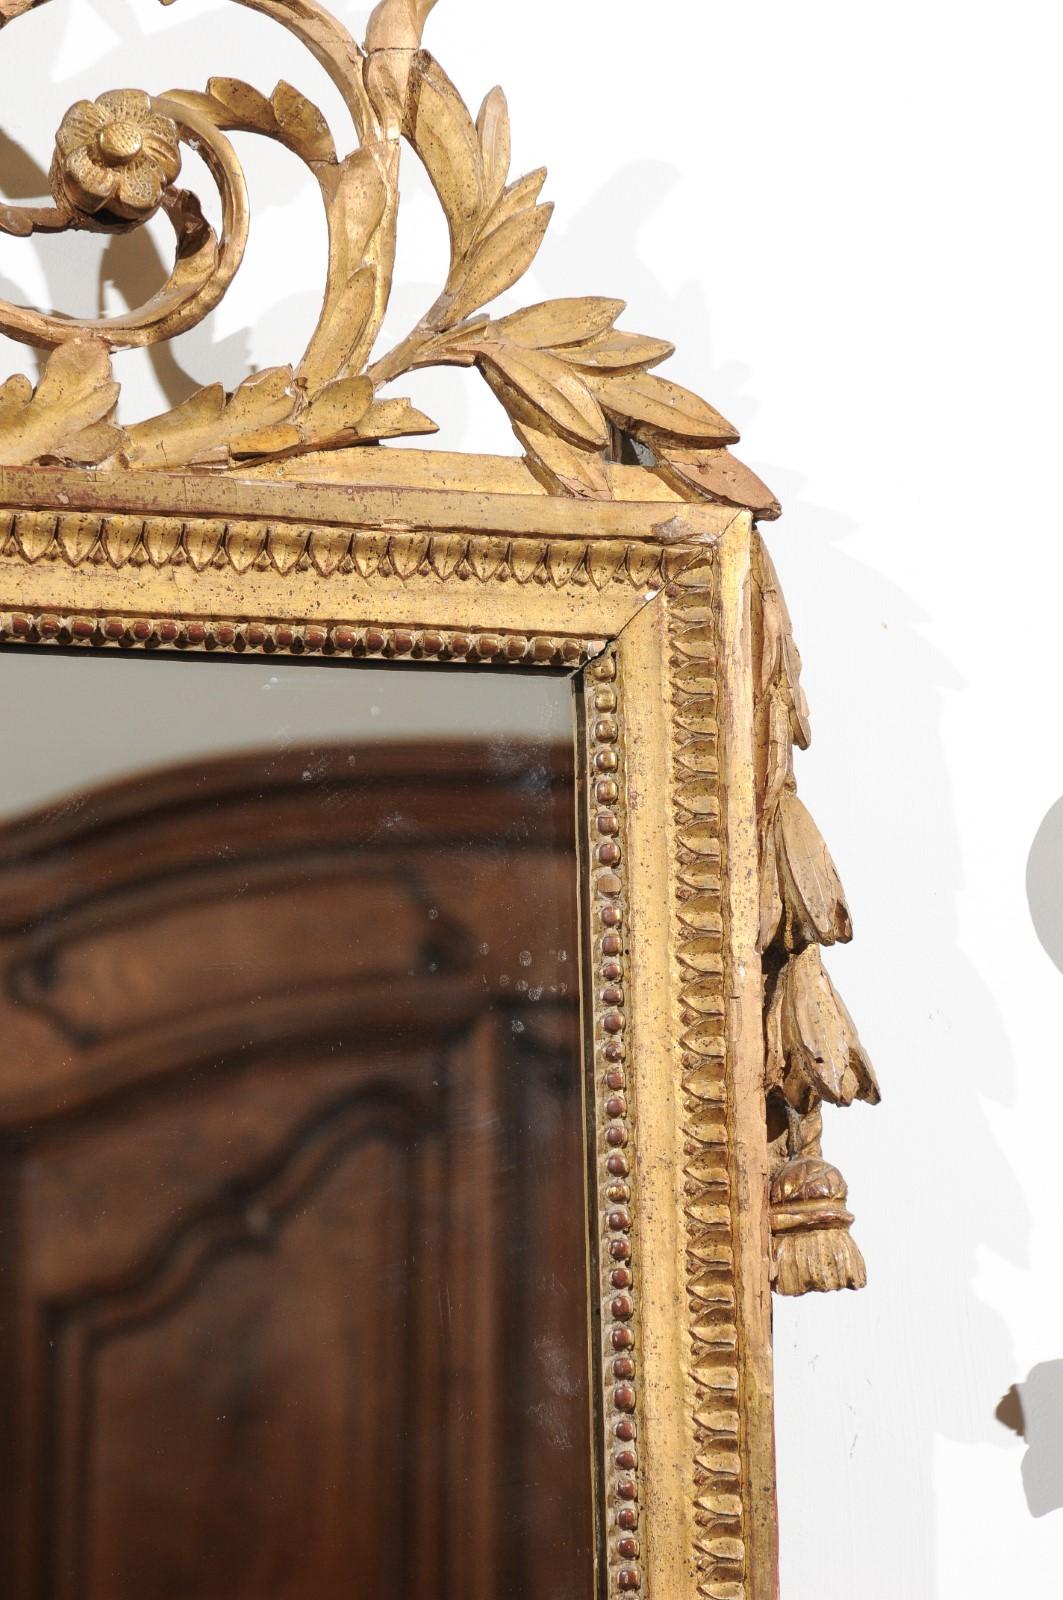 A French Louis XVI period giltwood wedding mirror from the late 18th century, with hand carved kissing doves. Born in France at the end of the Ancien Régime, this exquisite wedding mirror features an eye-catching hand carved crest, adorned with